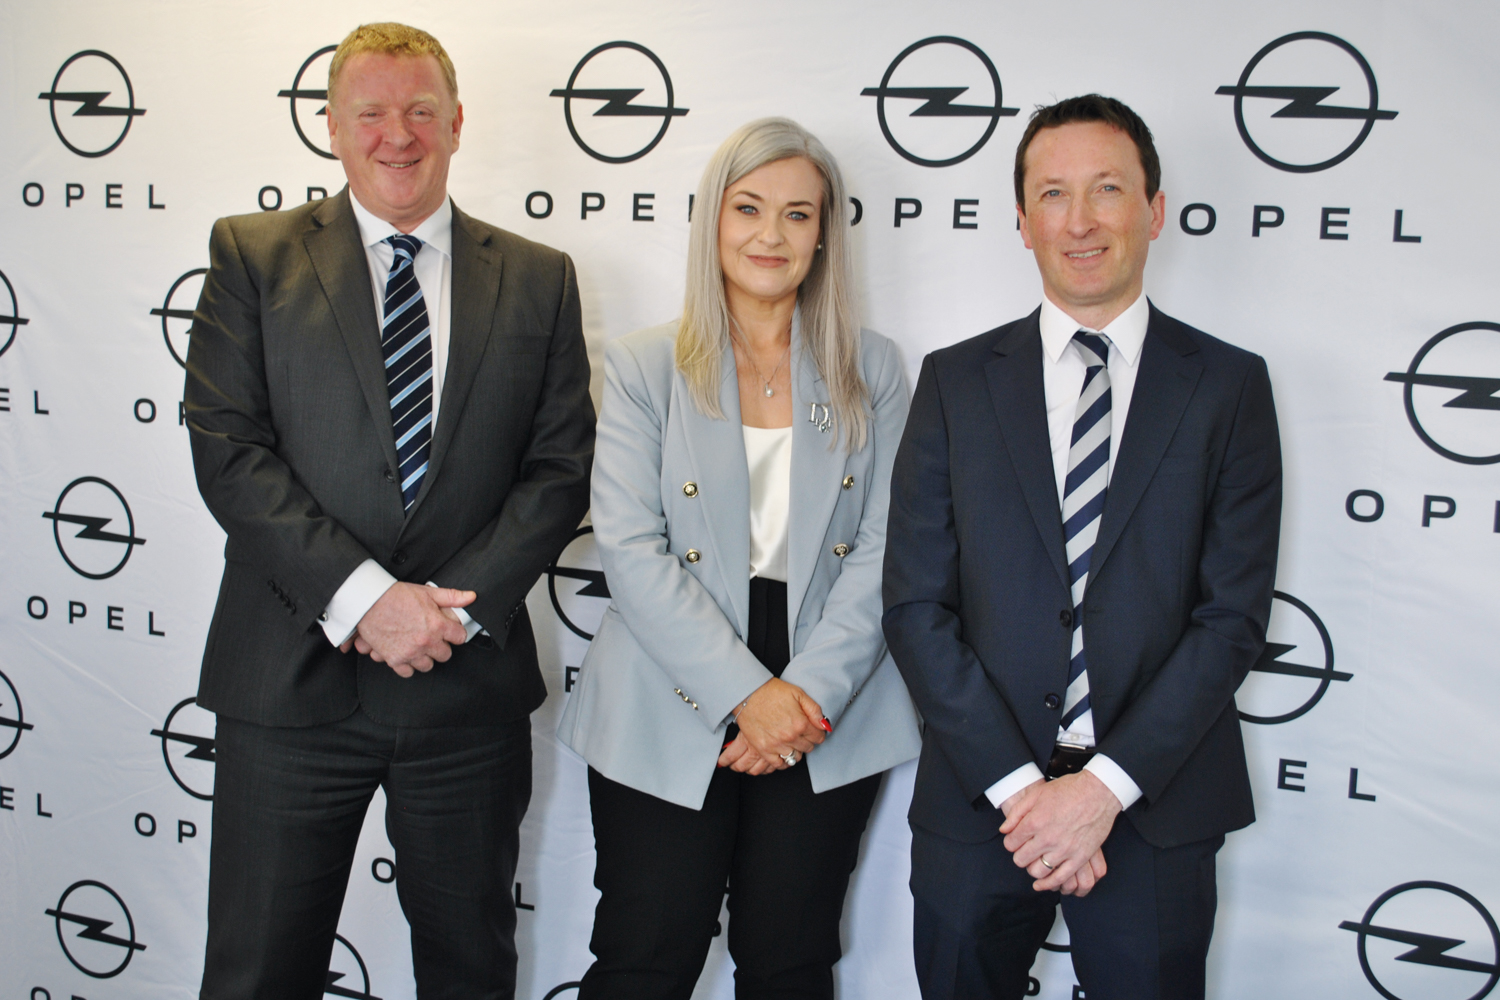 Car Industry News | Rochford Motors gets Opel franchise for Mayo | CompleteCar.ie